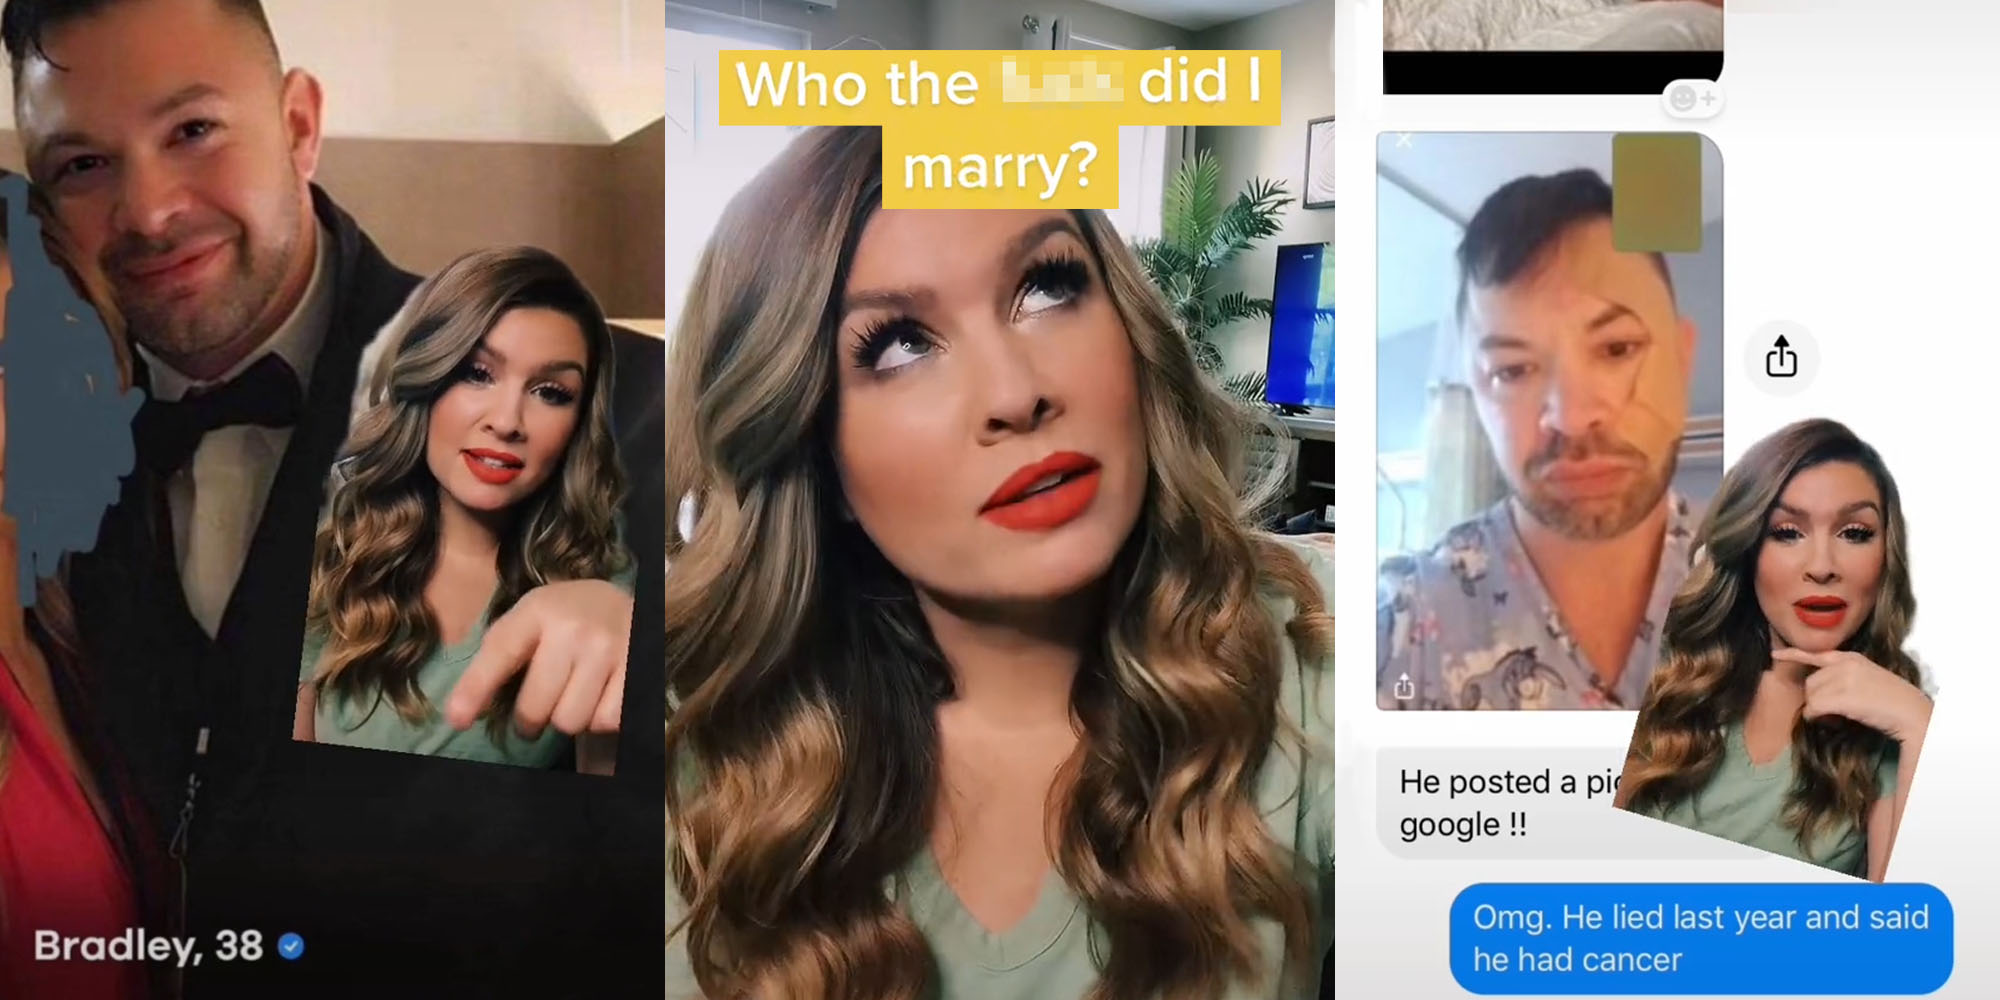 Women Speak Out Against Shared Ex-Husband After TikTok Goes Viral picture